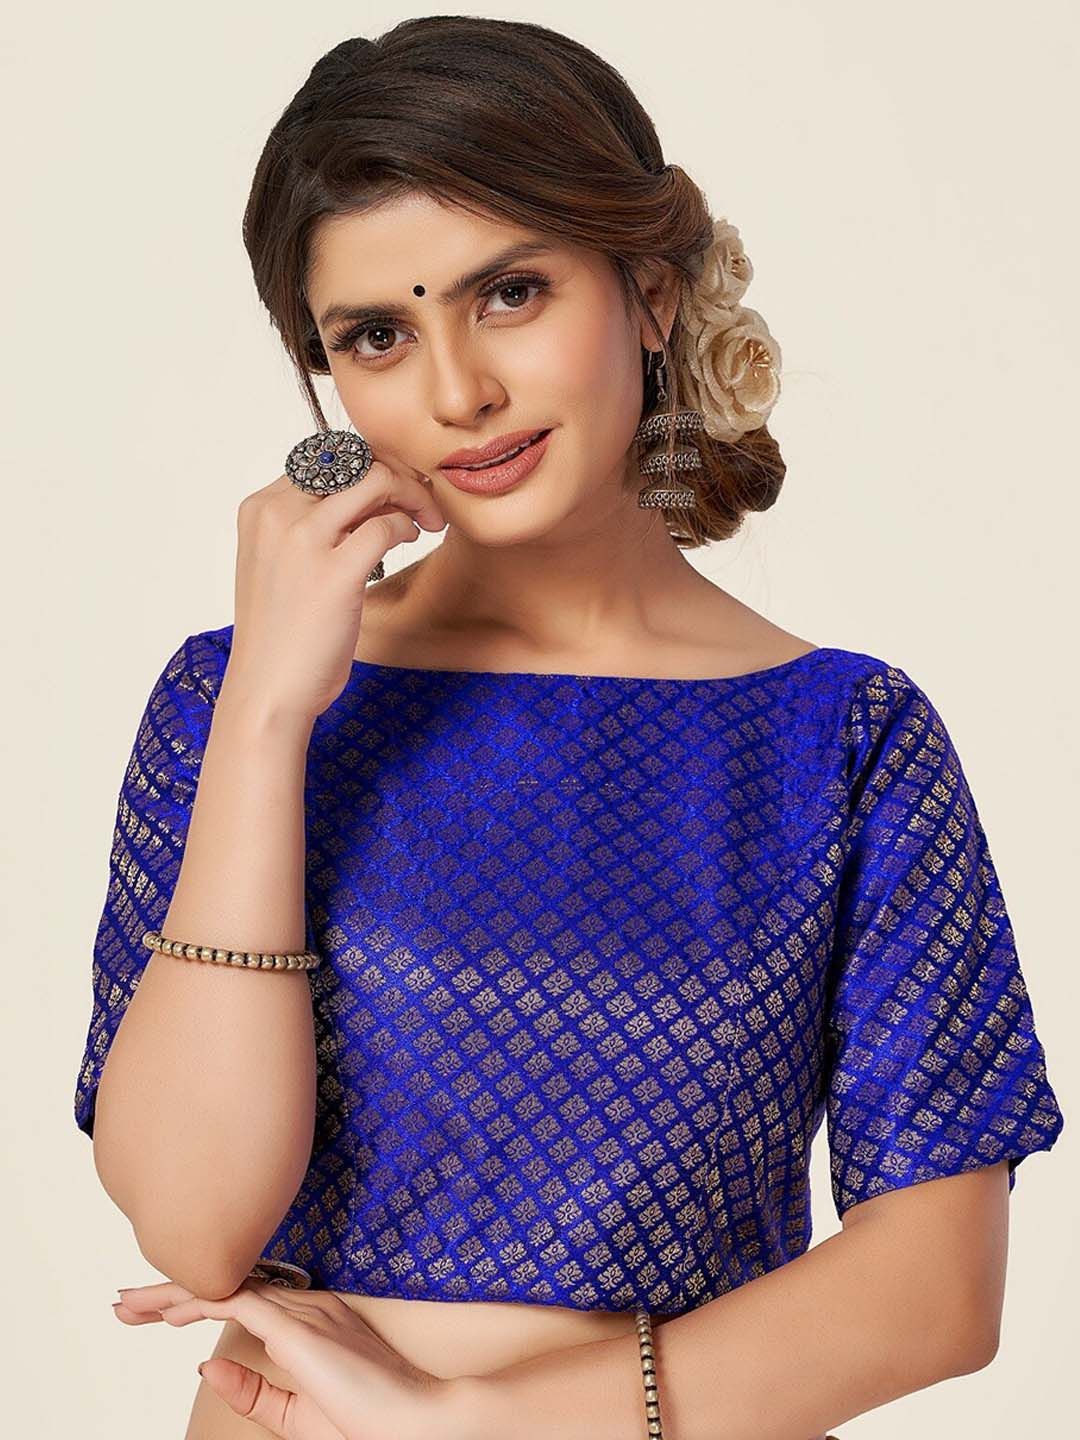 HIMRISE women Blue Woven Design Saree Blouse Price in India